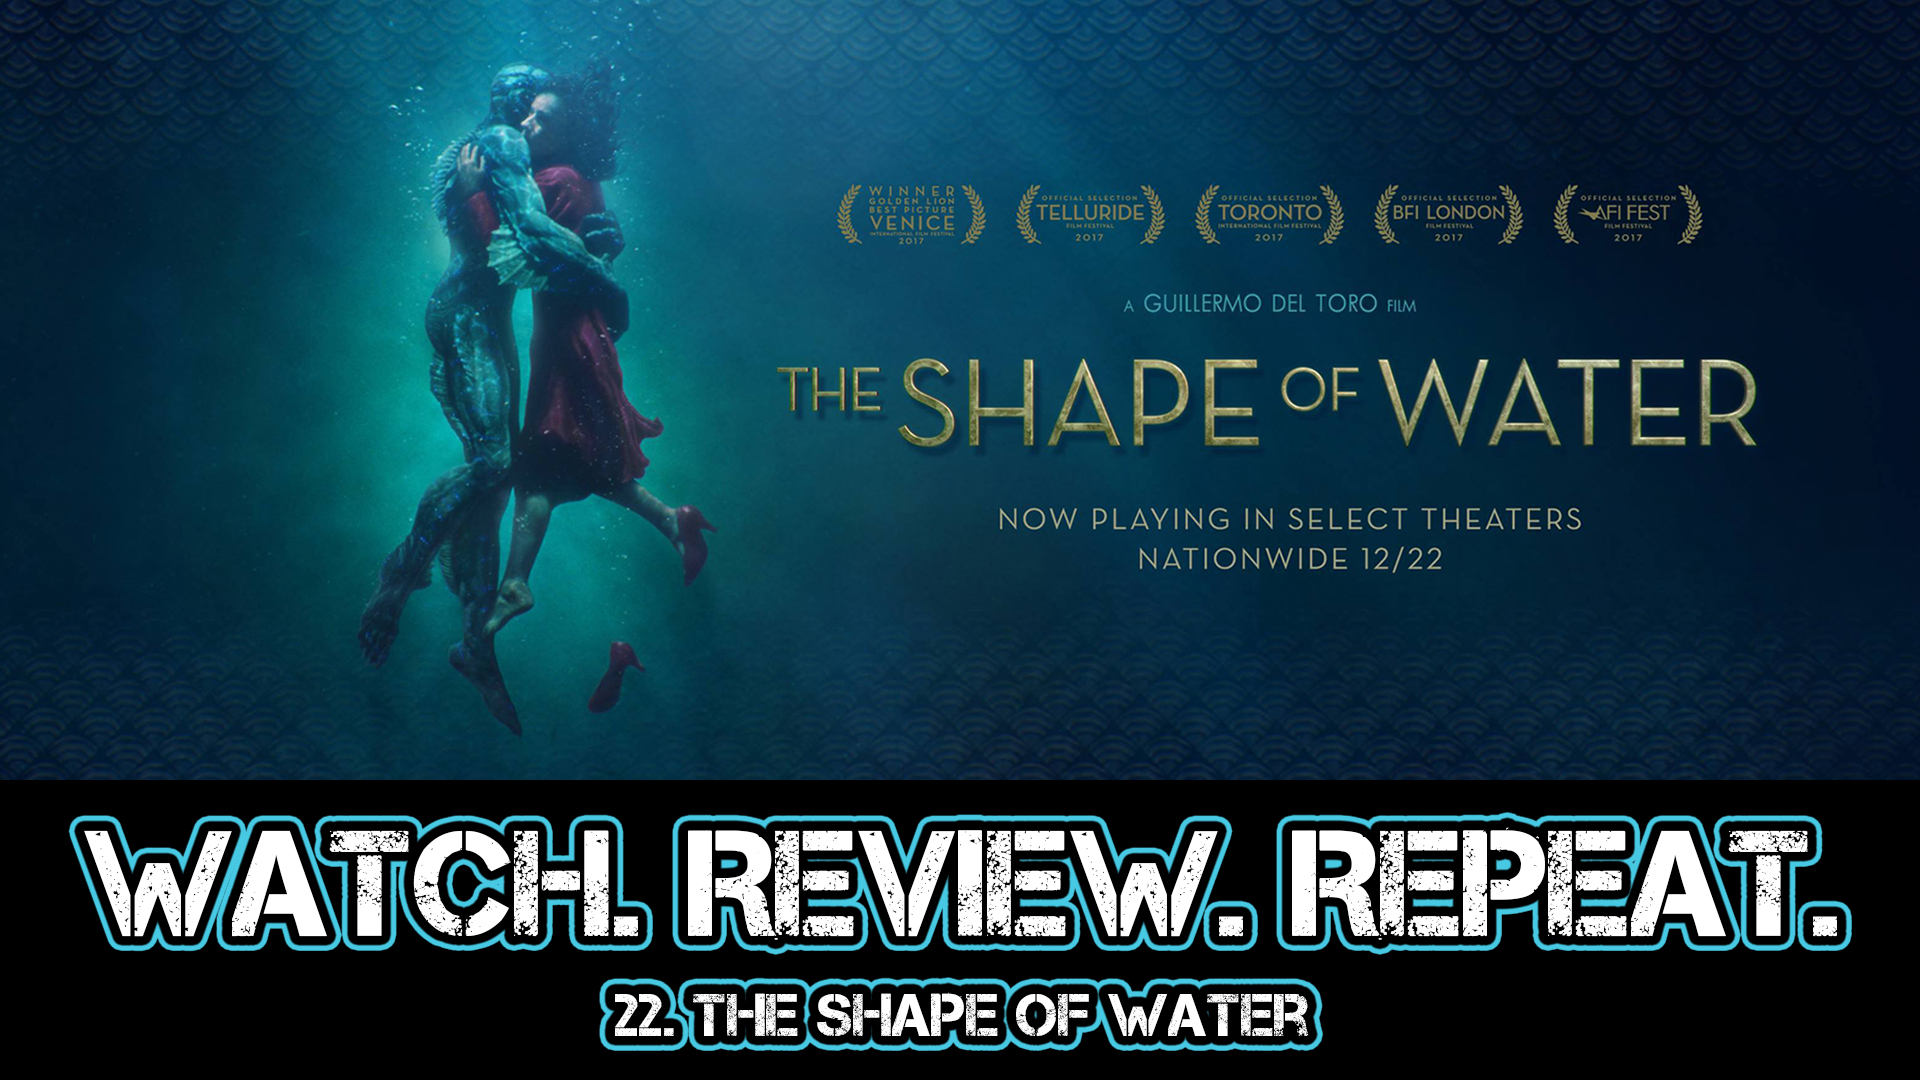 22. The Shape of Water